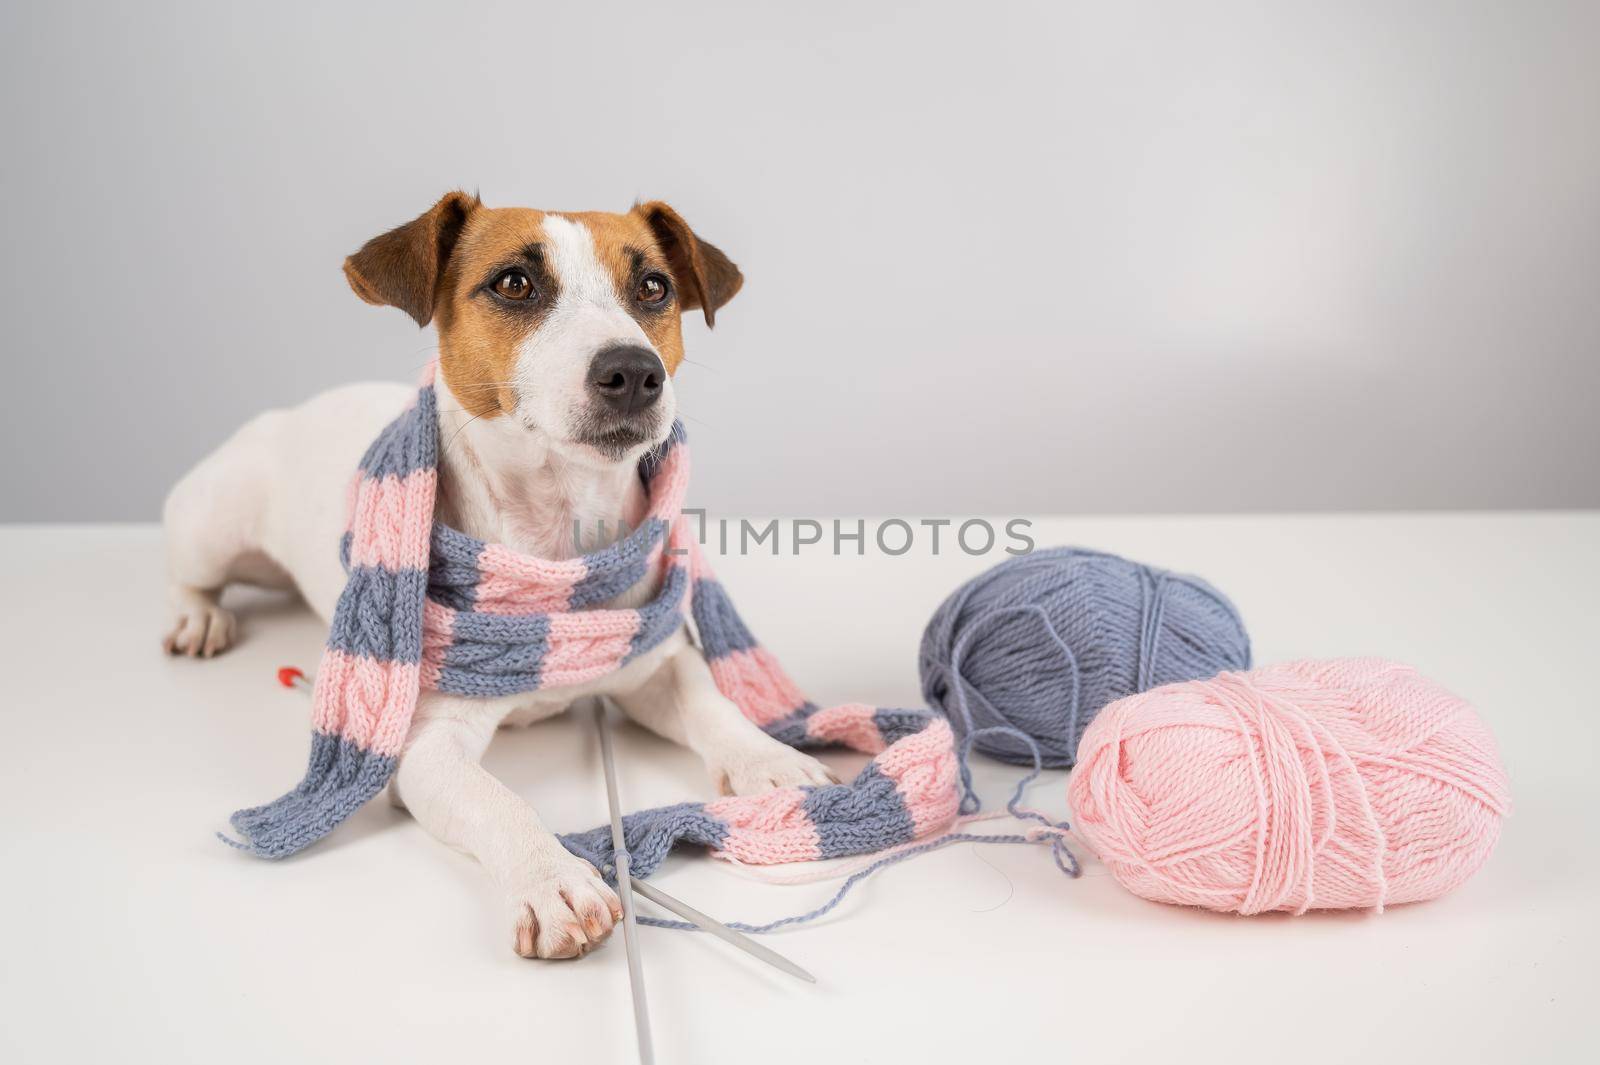 Dog jack russell terrier knits a knitted scarf on a white background